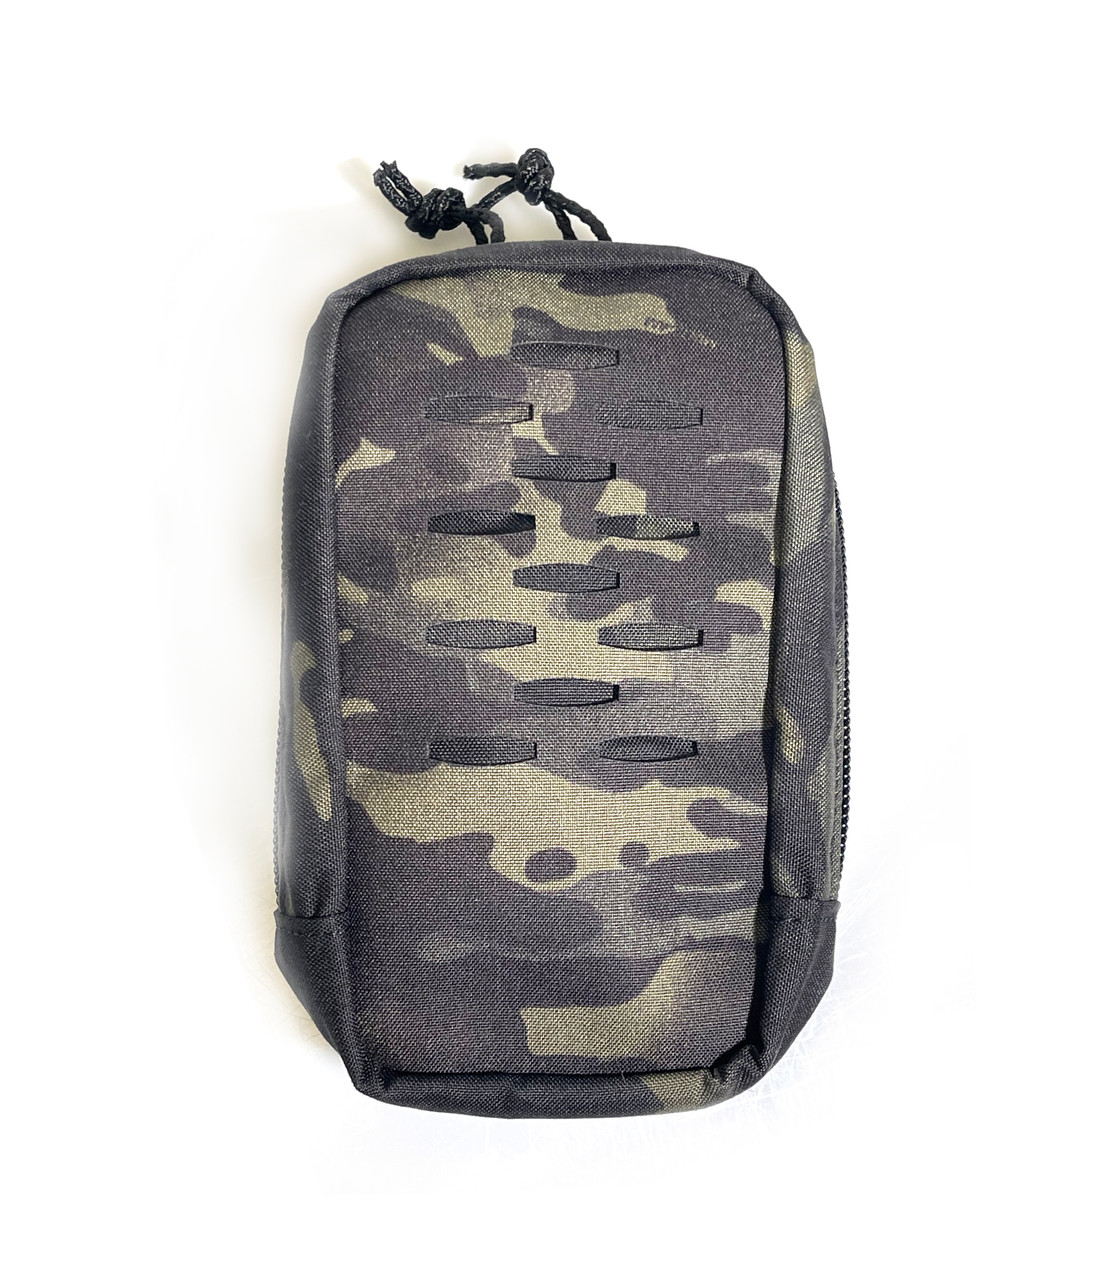 IFAK Medical Pouch, Tactical Medical Pouch